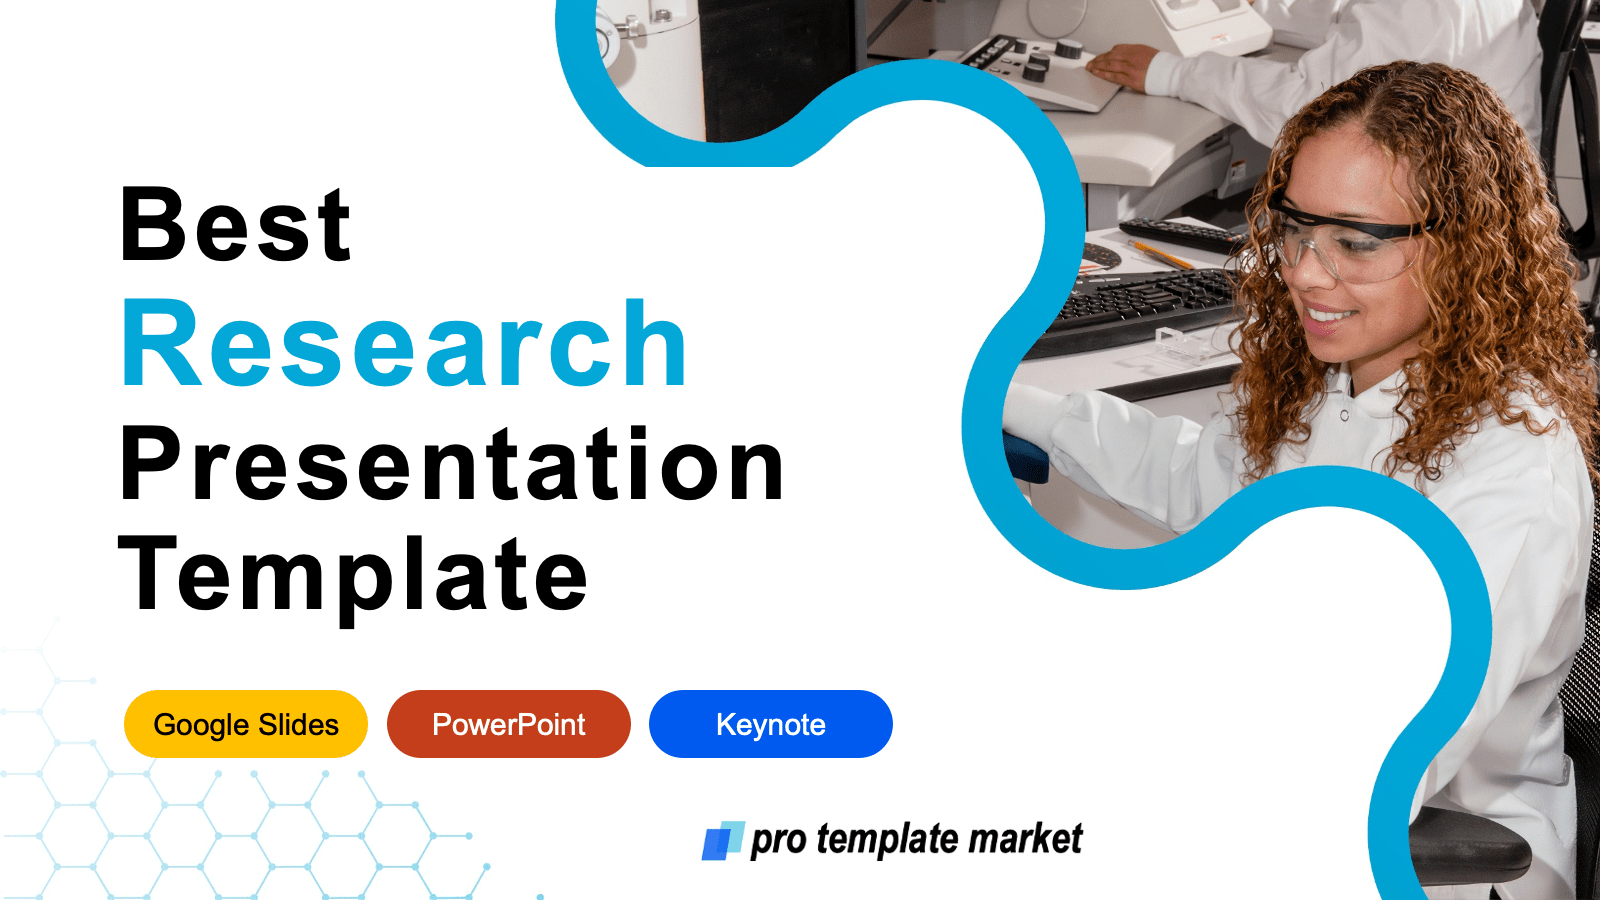 Top 10 Research Presentation Templates in 2022